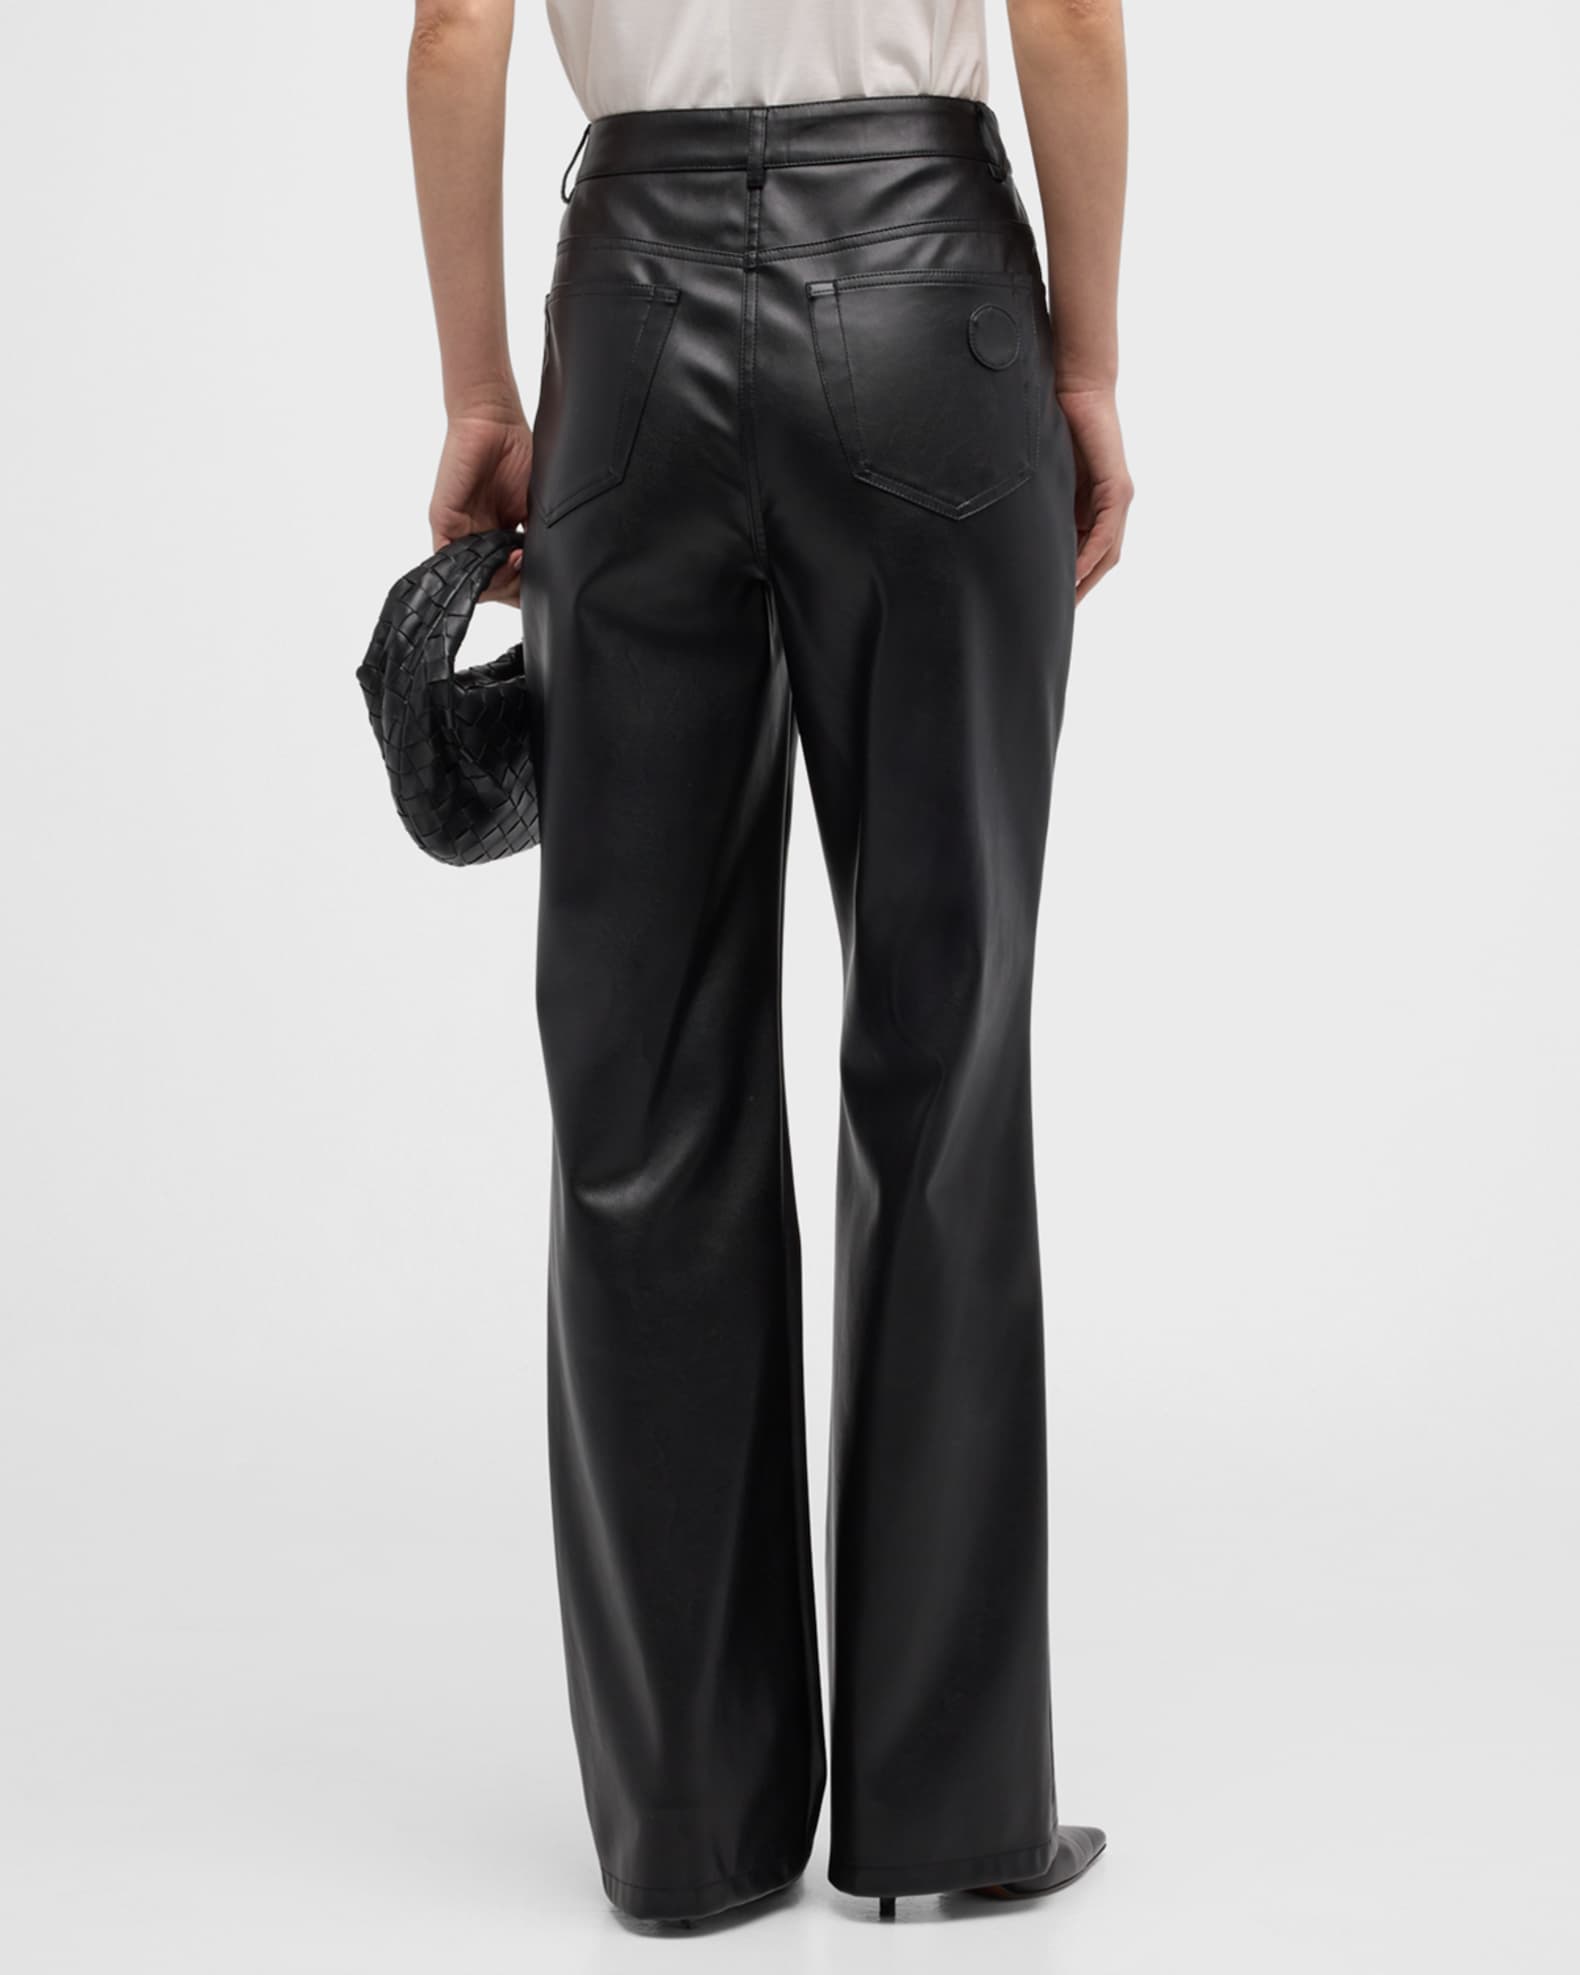 Akris punto Carrie Mid-Rise Faux Leather Straight Pants | Neiman Marcus